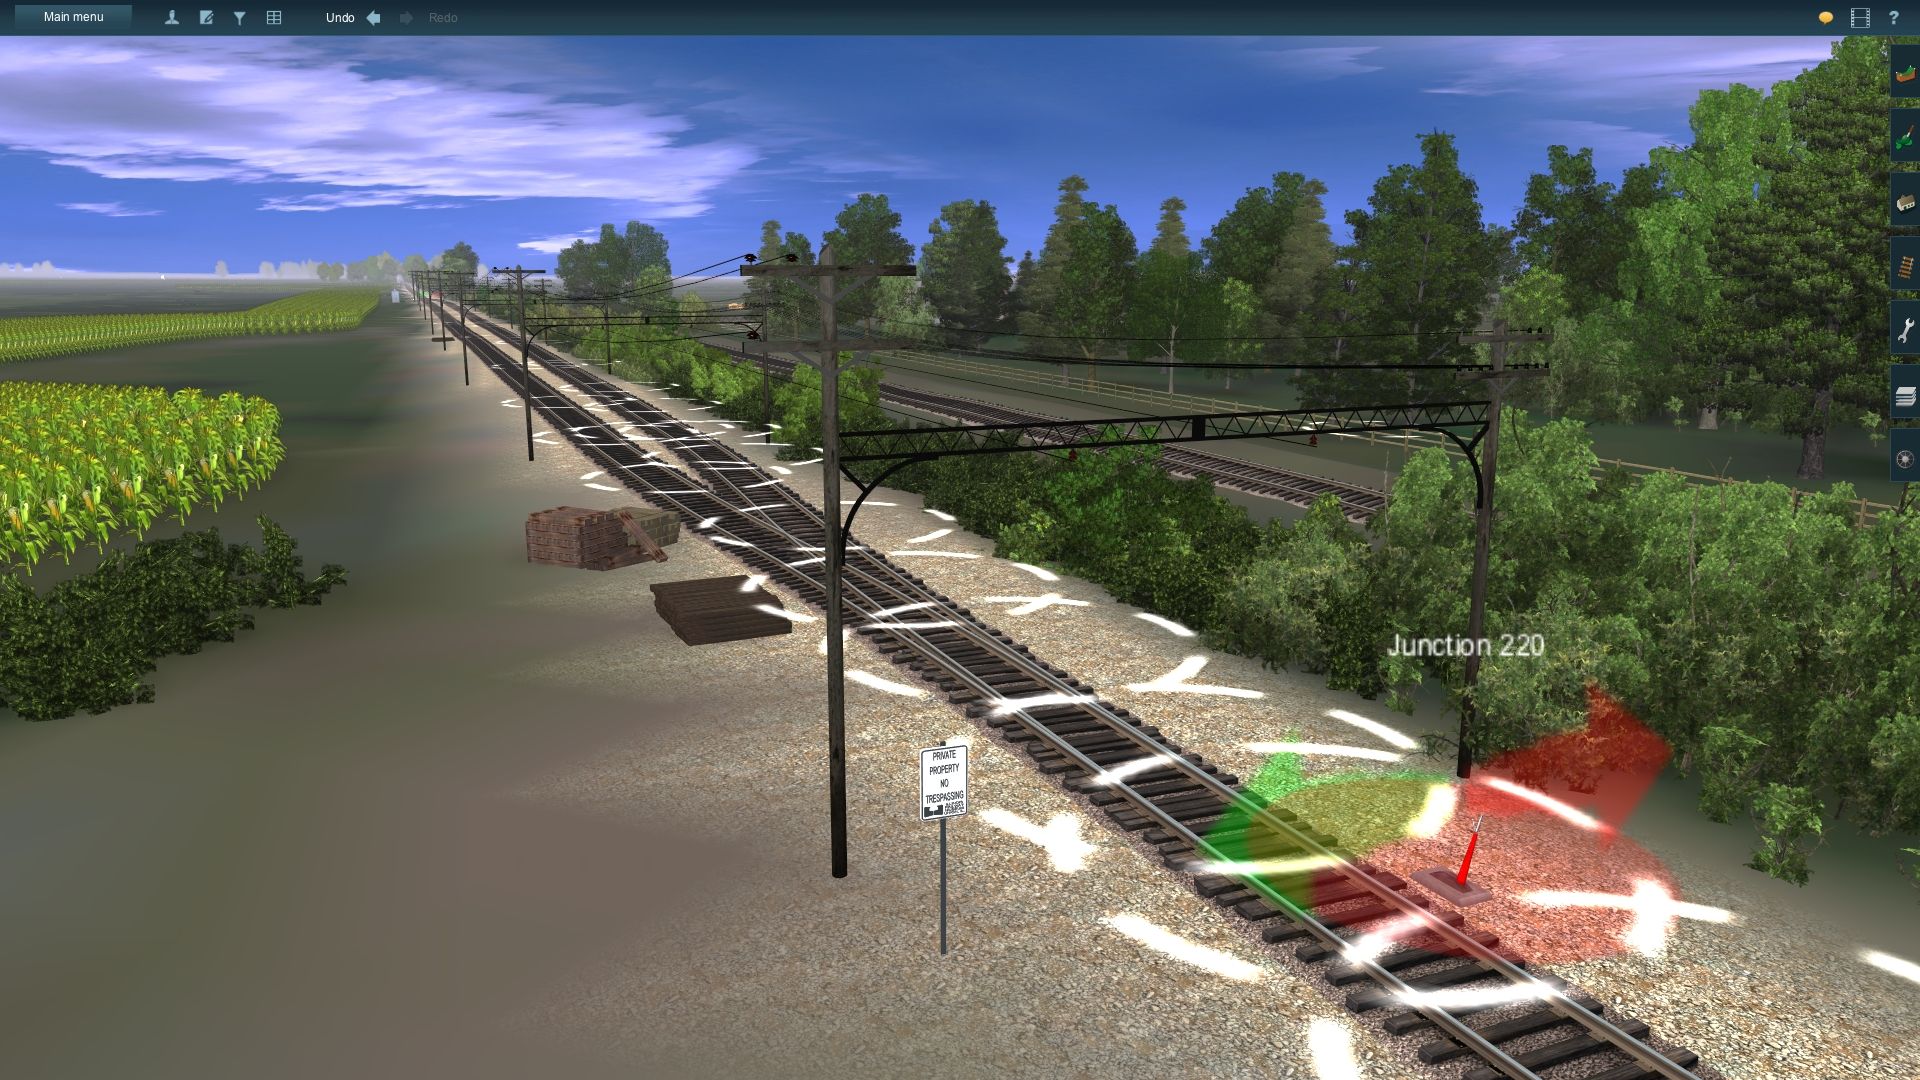 Showing-off-the-new-track-ballast-textures-at-Johnson-Siding-on-my-IRM-Route.jpg